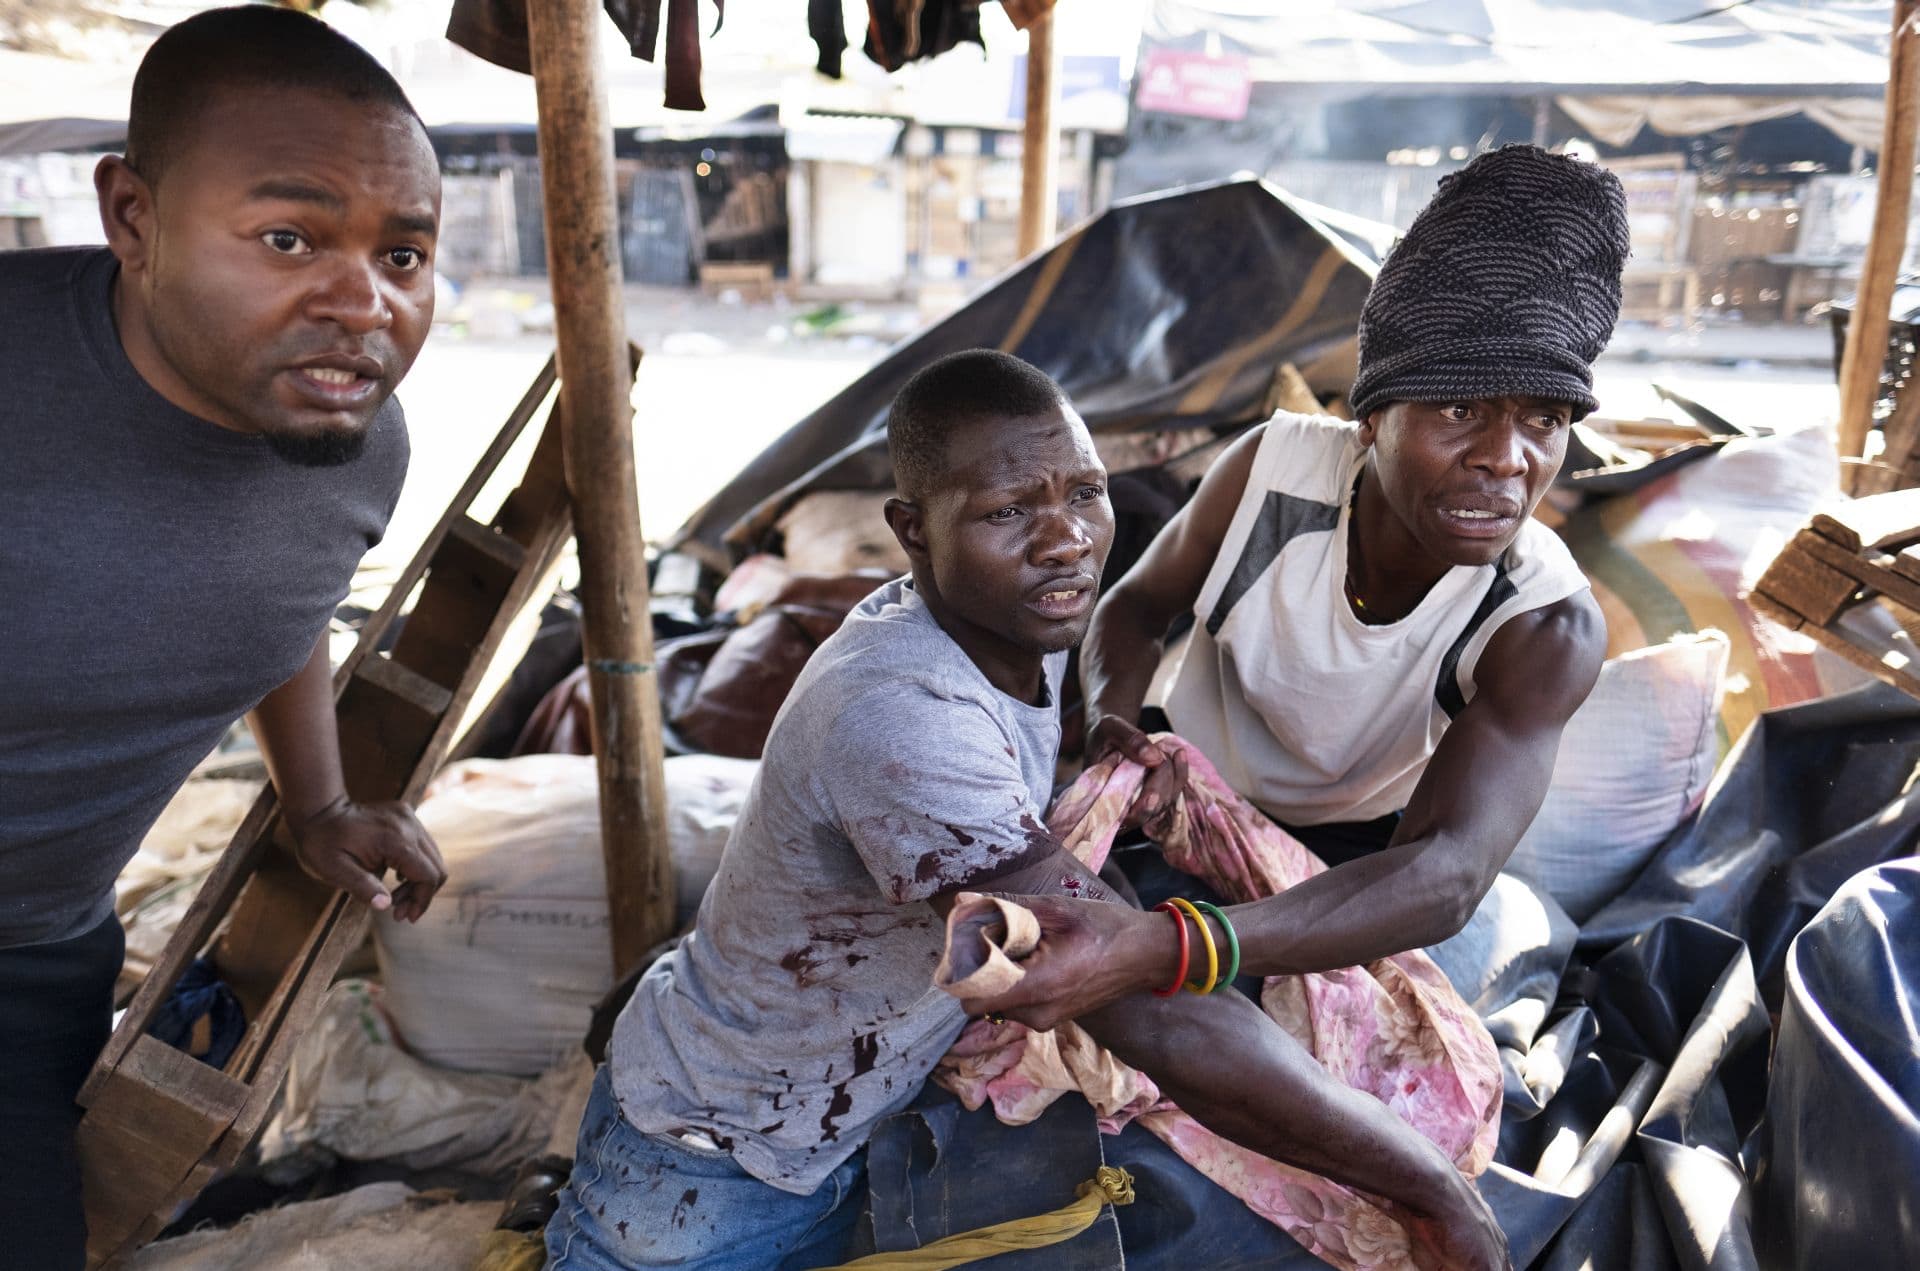 A wounded man takes shelter in a market stall in Harare as protests turned violent.